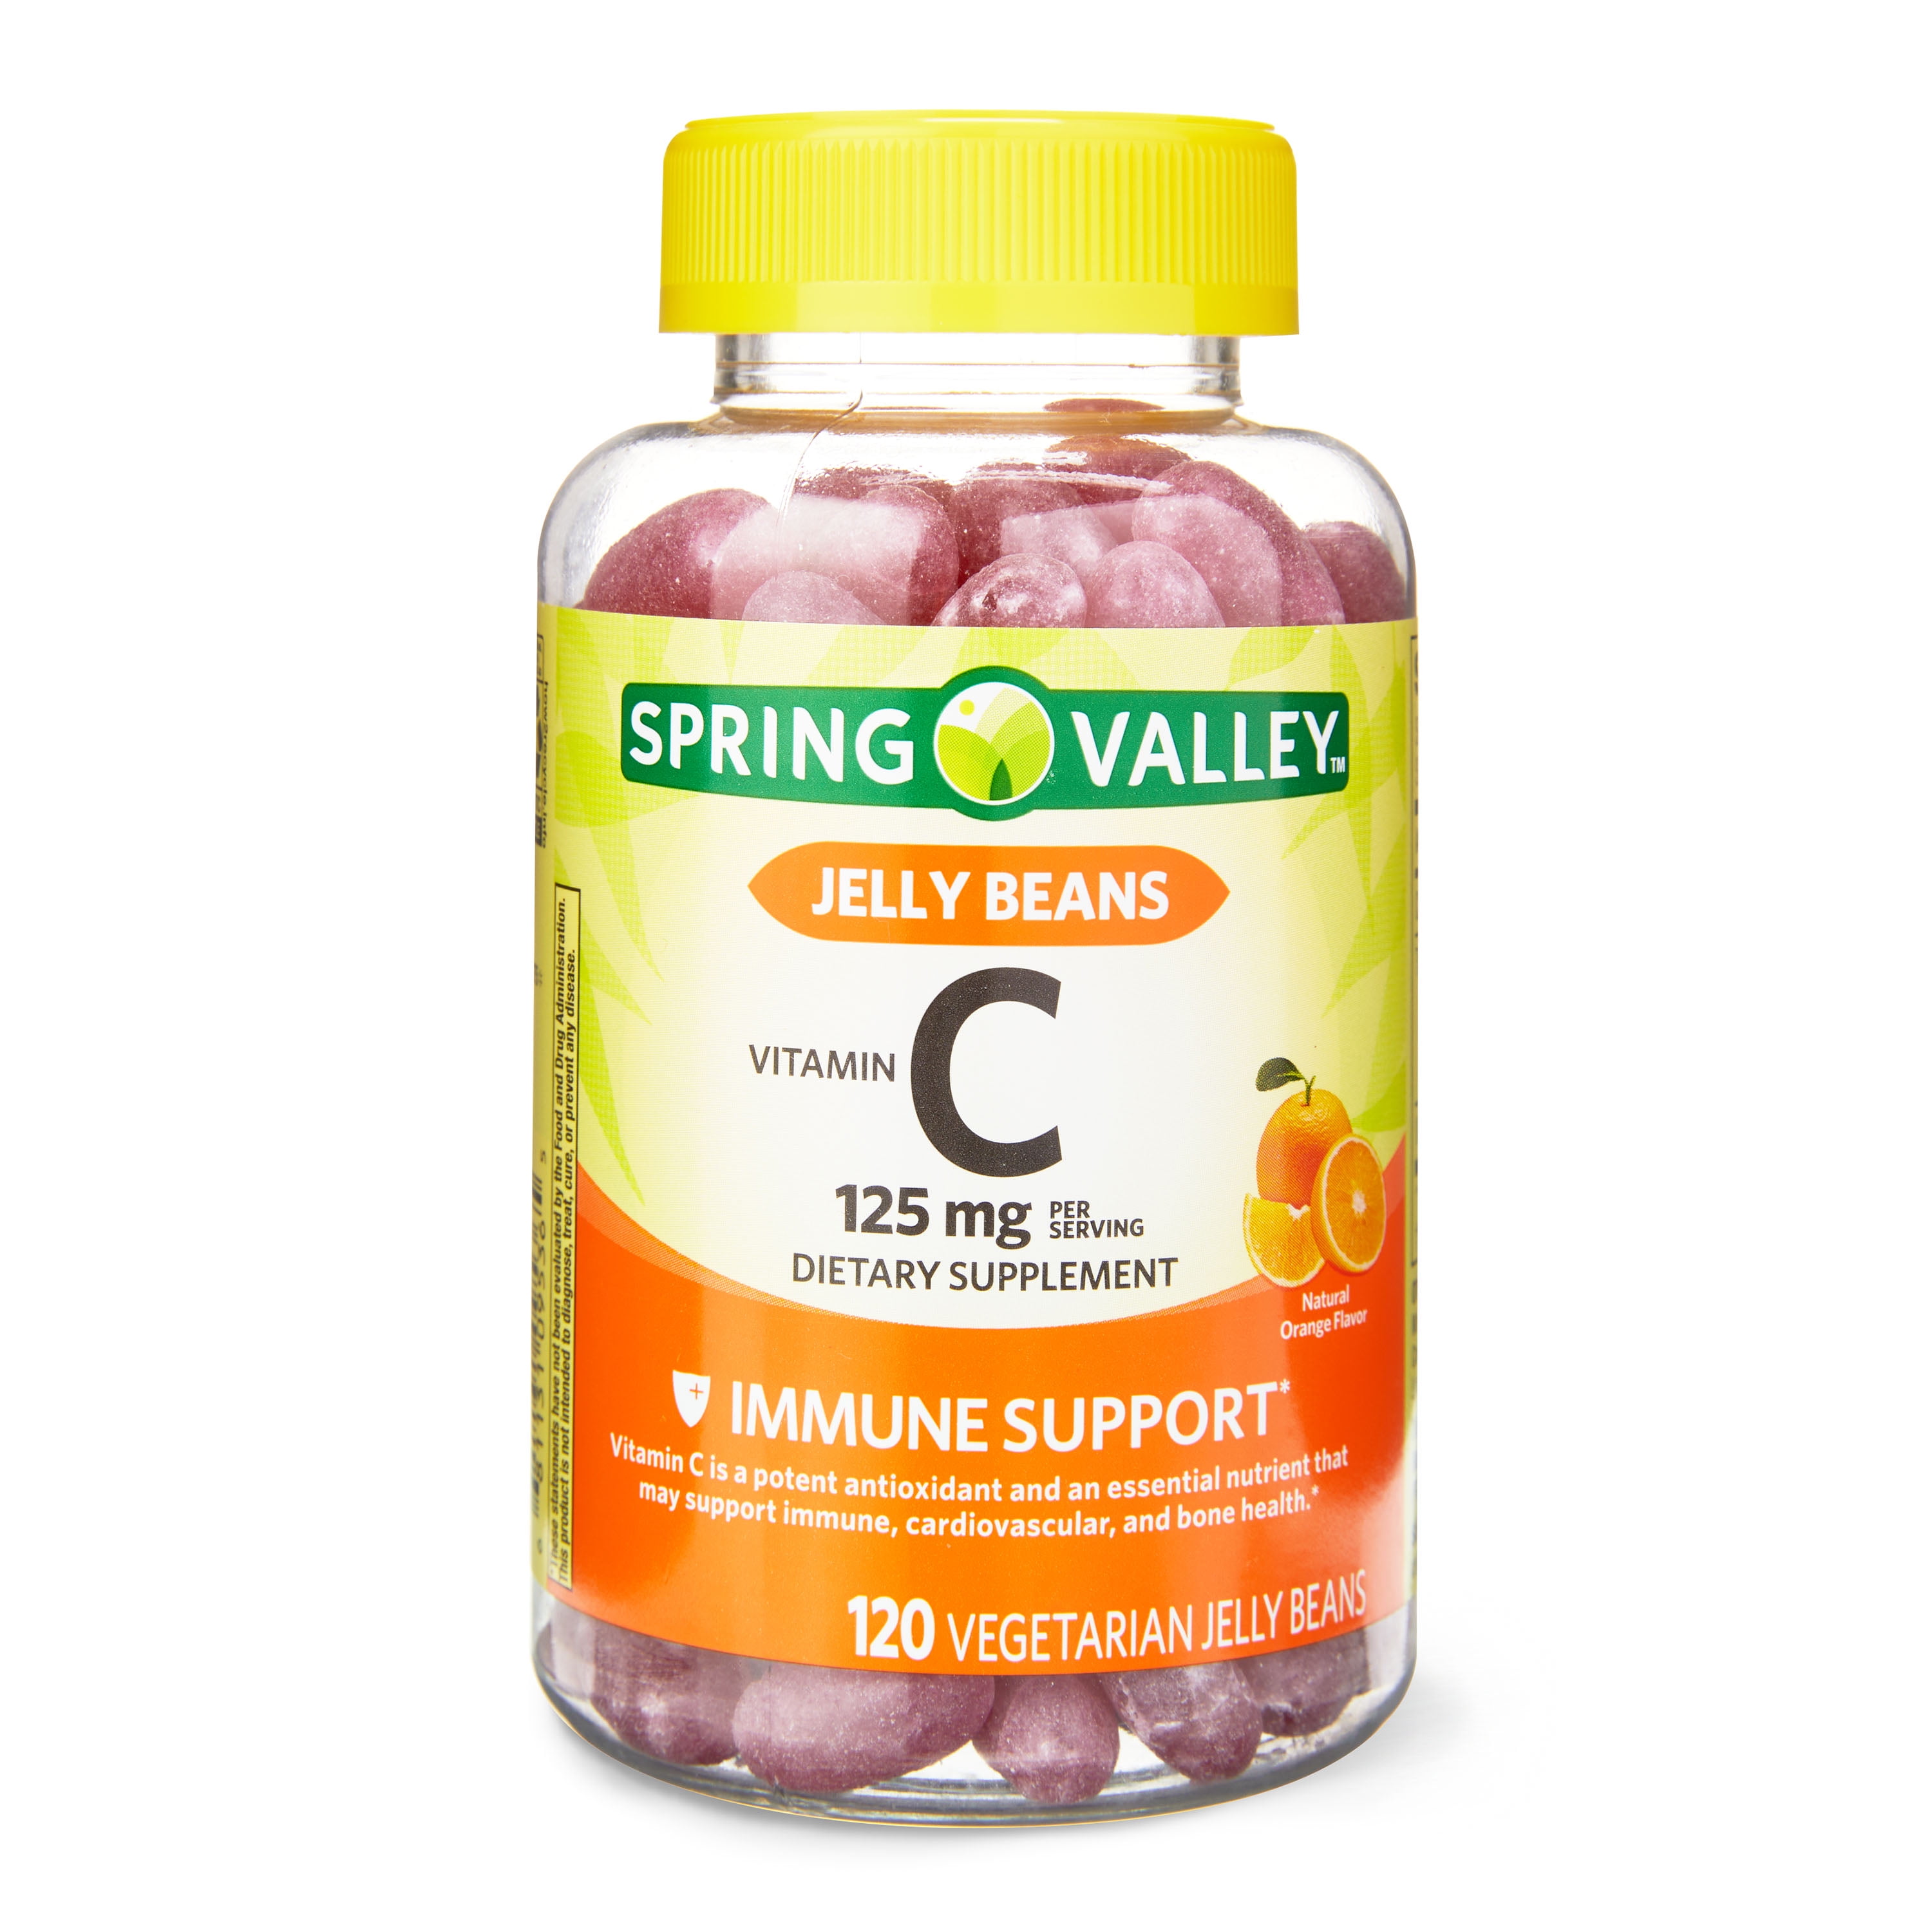 Spring Valley Vitamin C, 125 mg Vegetarian Jelly Beans Supplement, 120Count